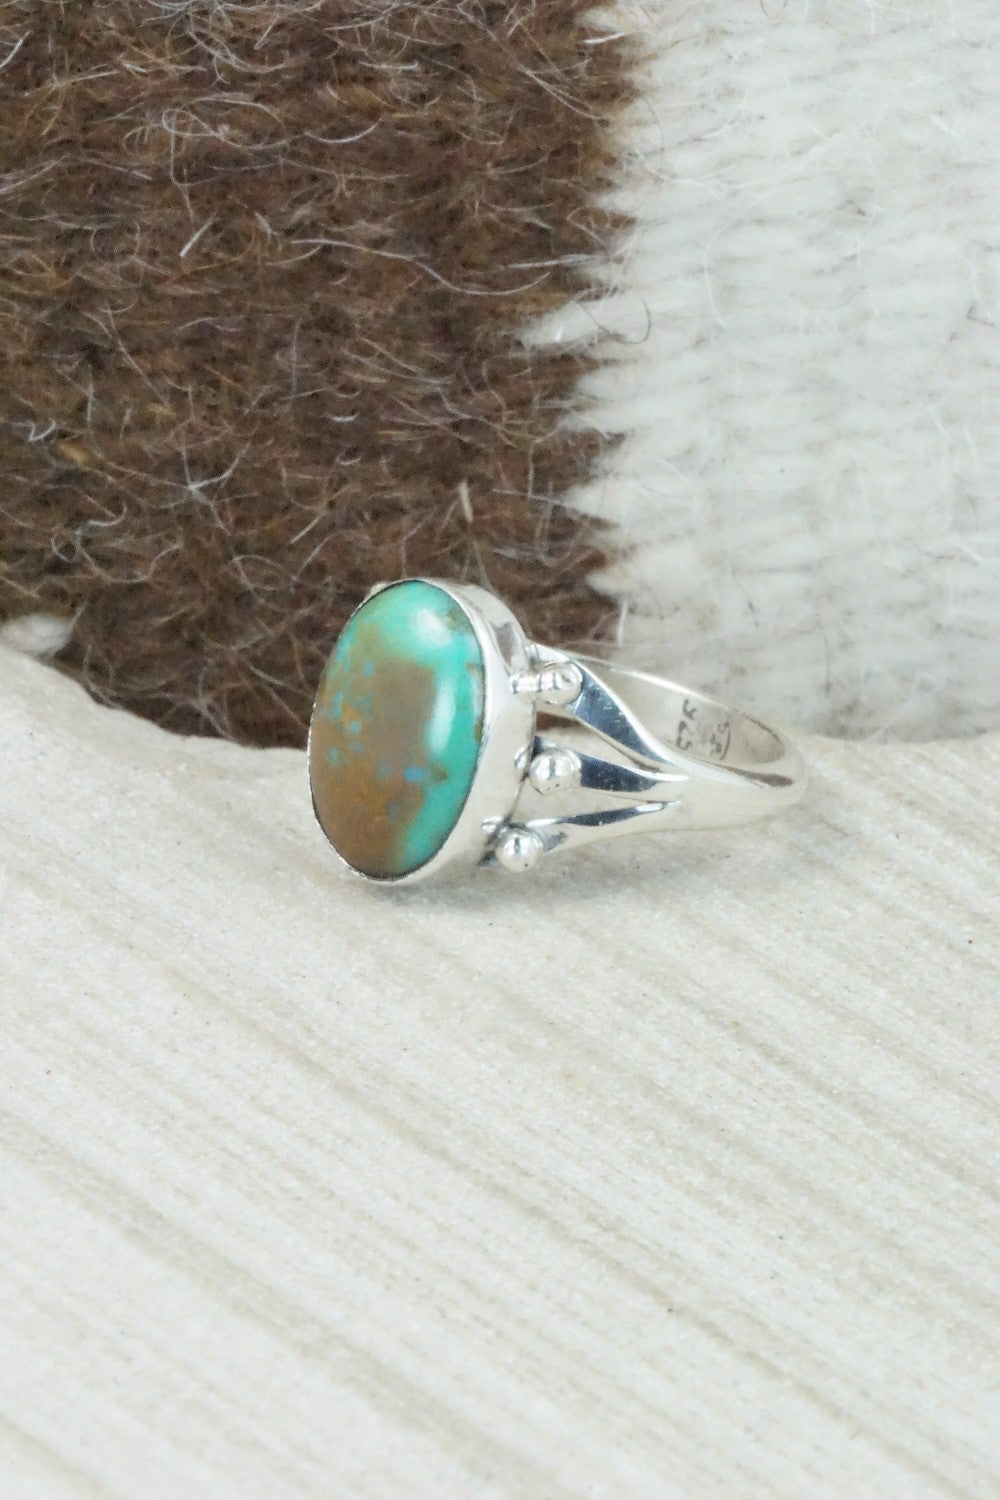 Turquoise & Sterling Silver Ring - Hiram Largo - Size 9.25